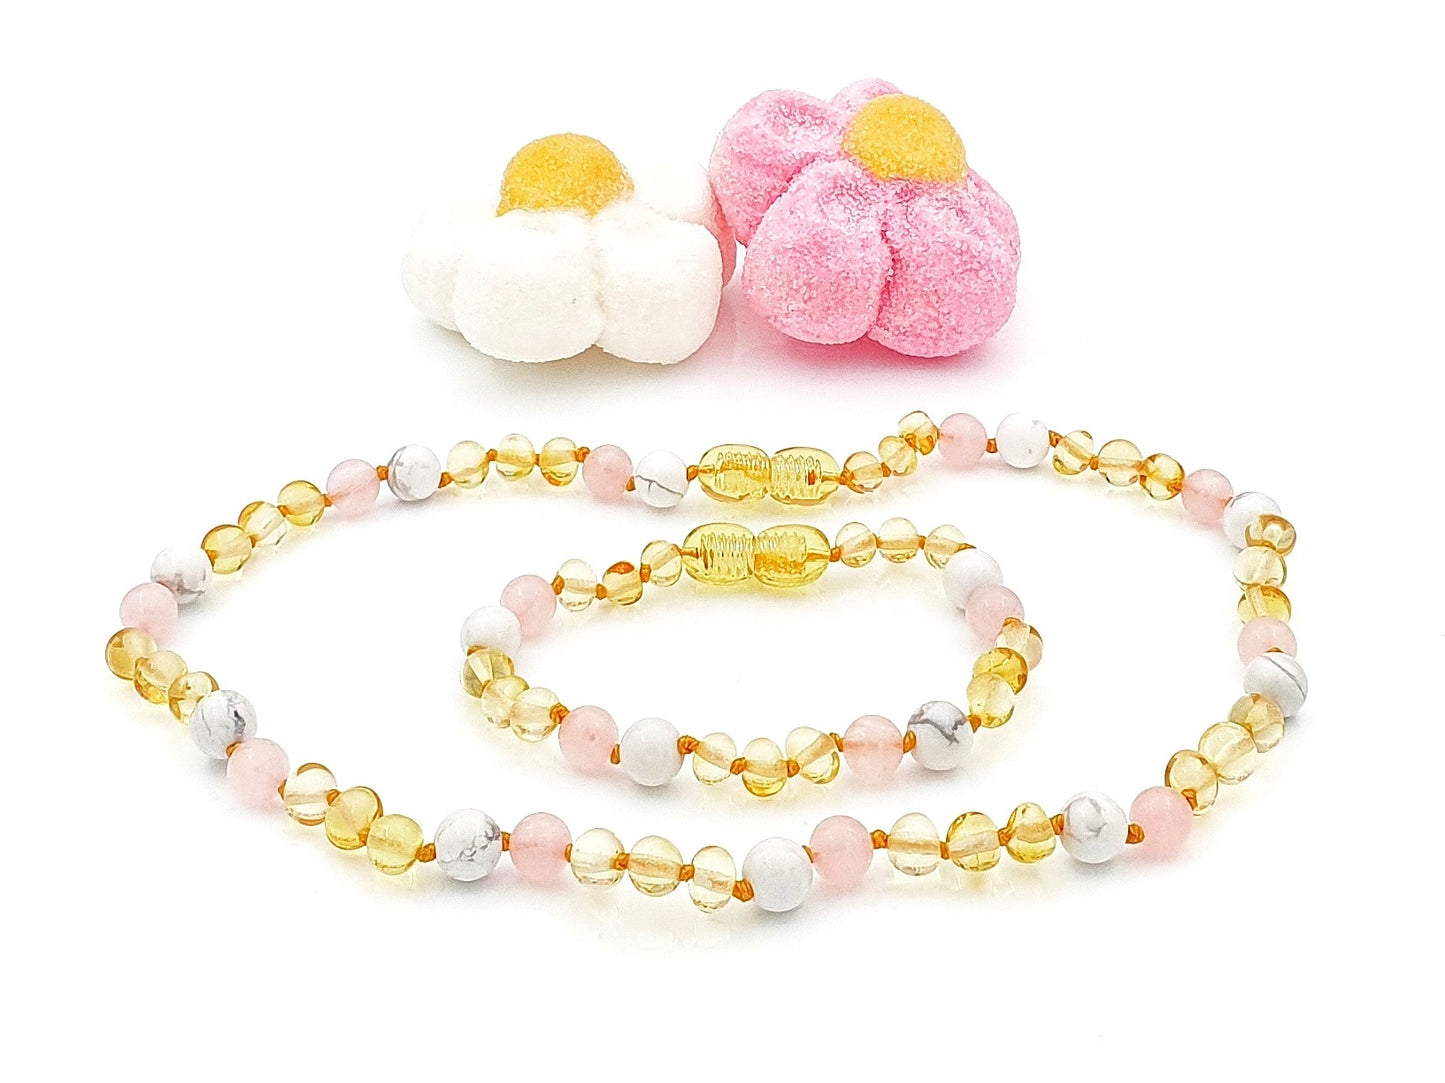 Amber baby beads with pink quartz